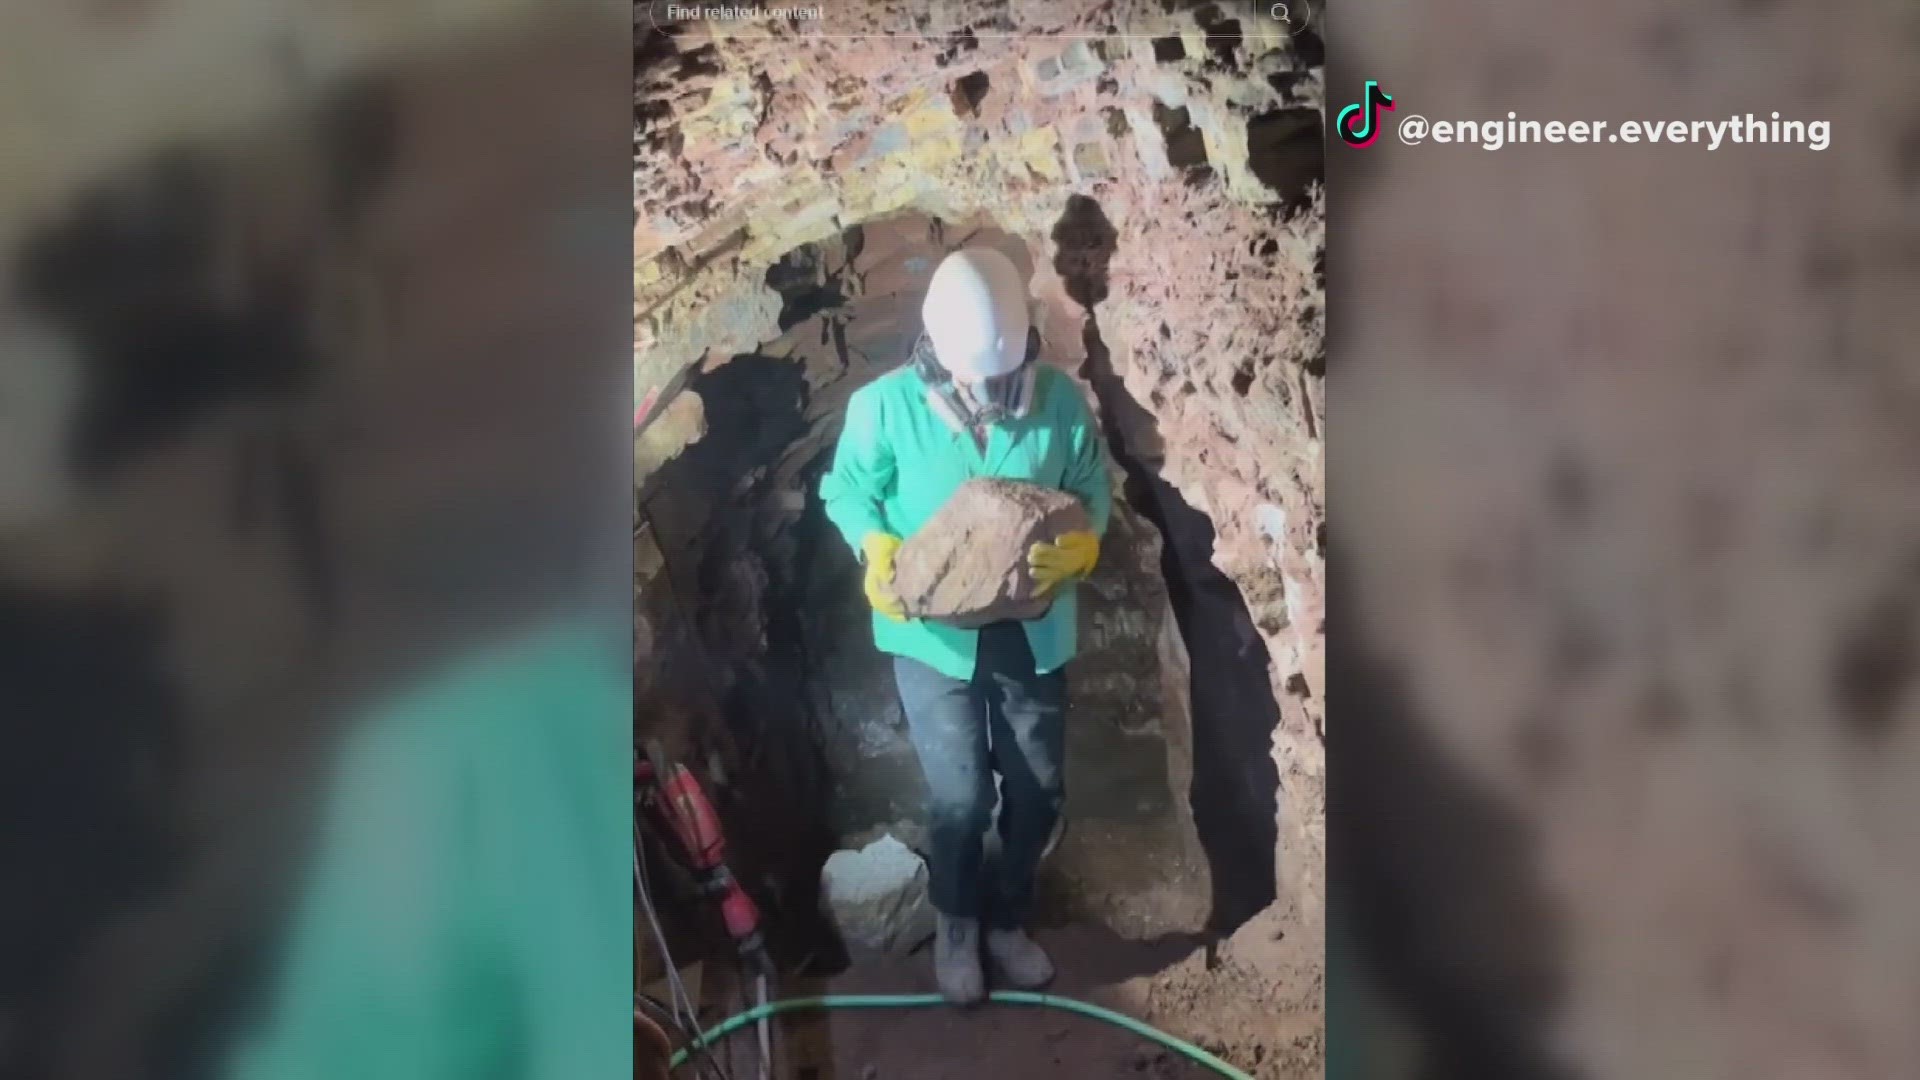 A Virginia woman has gone viral on TikTok for documenting herself building a tunnel under her home.